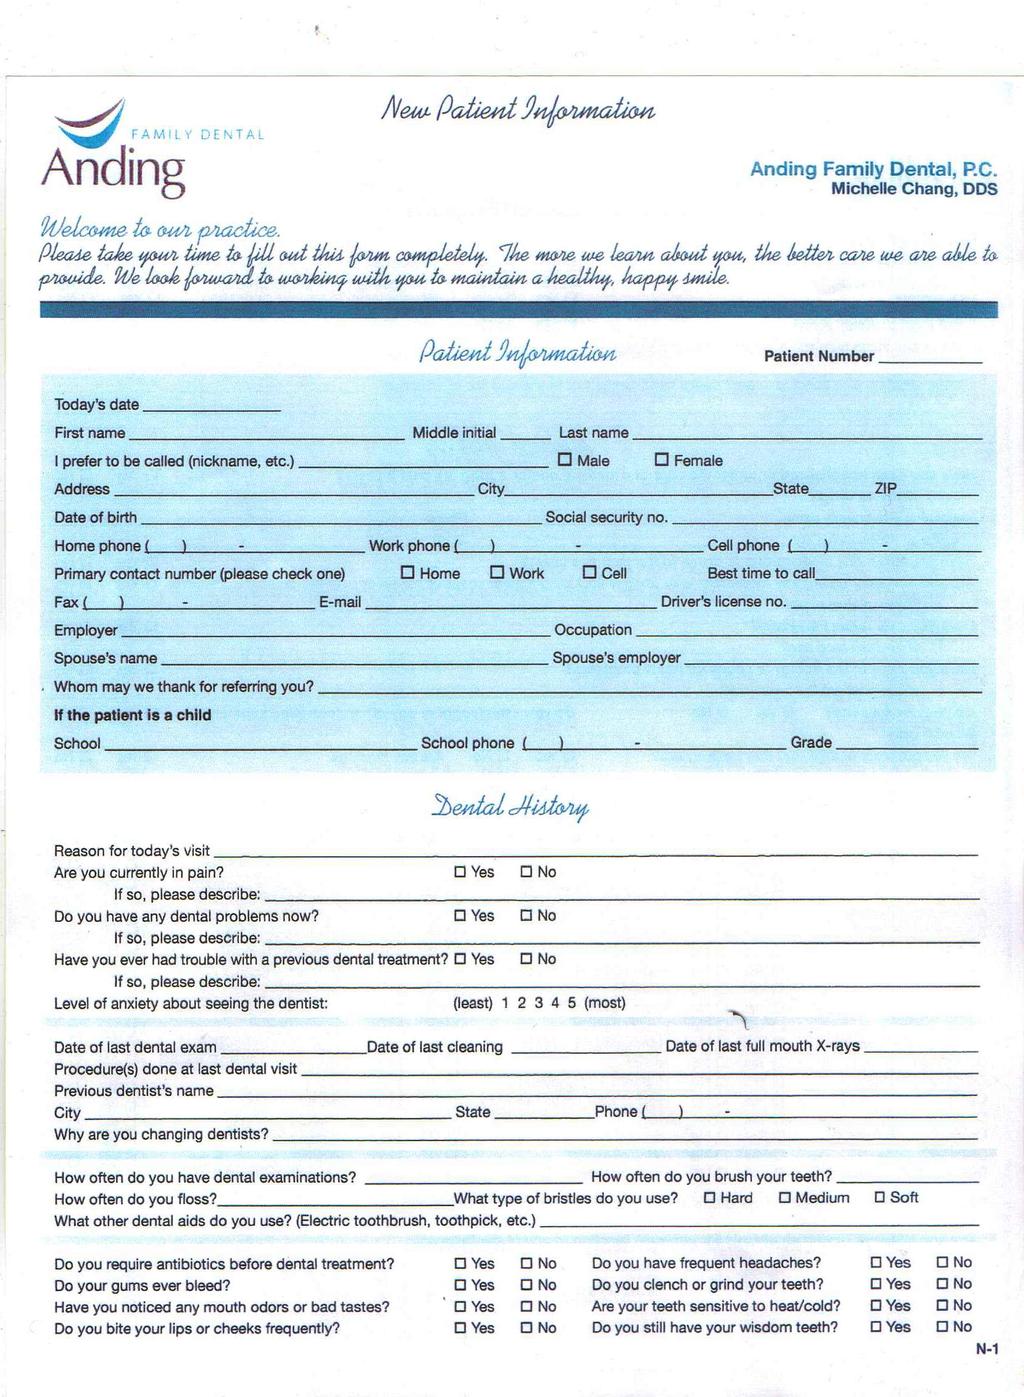 New Patient Information Welcome to our practice. Please take your time to fill out this form completely. The more we learn about you, the better care we are able to provide.